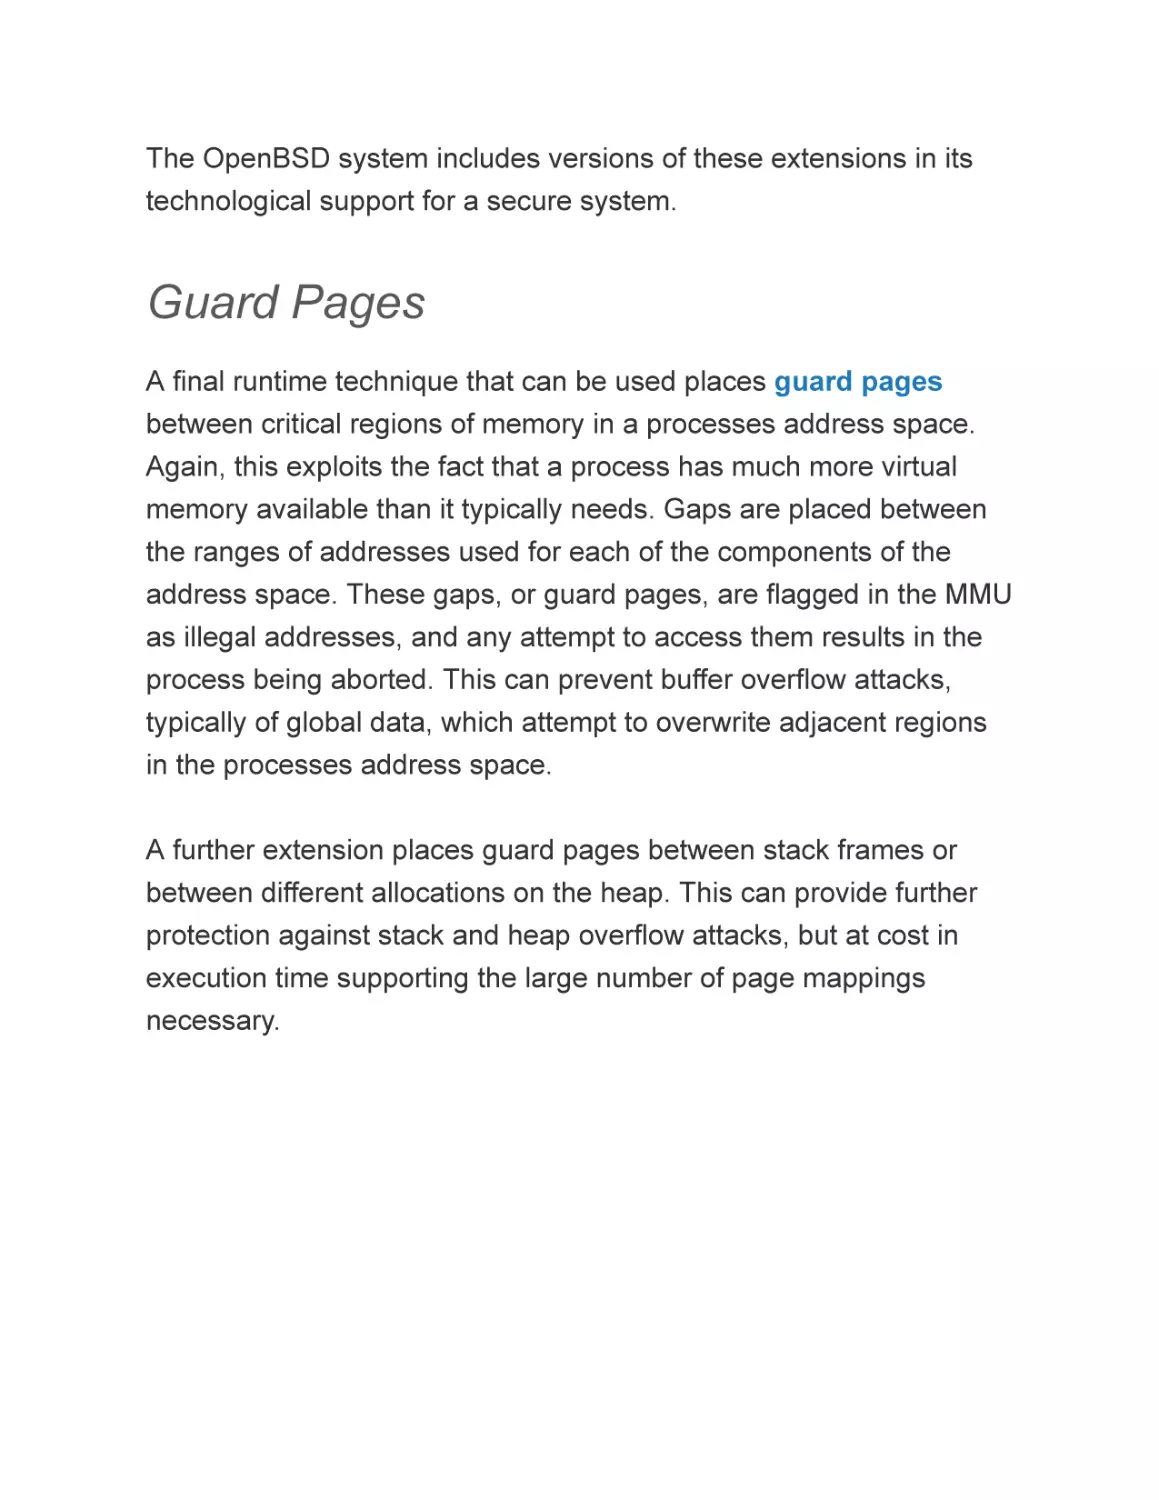 Guard Pages